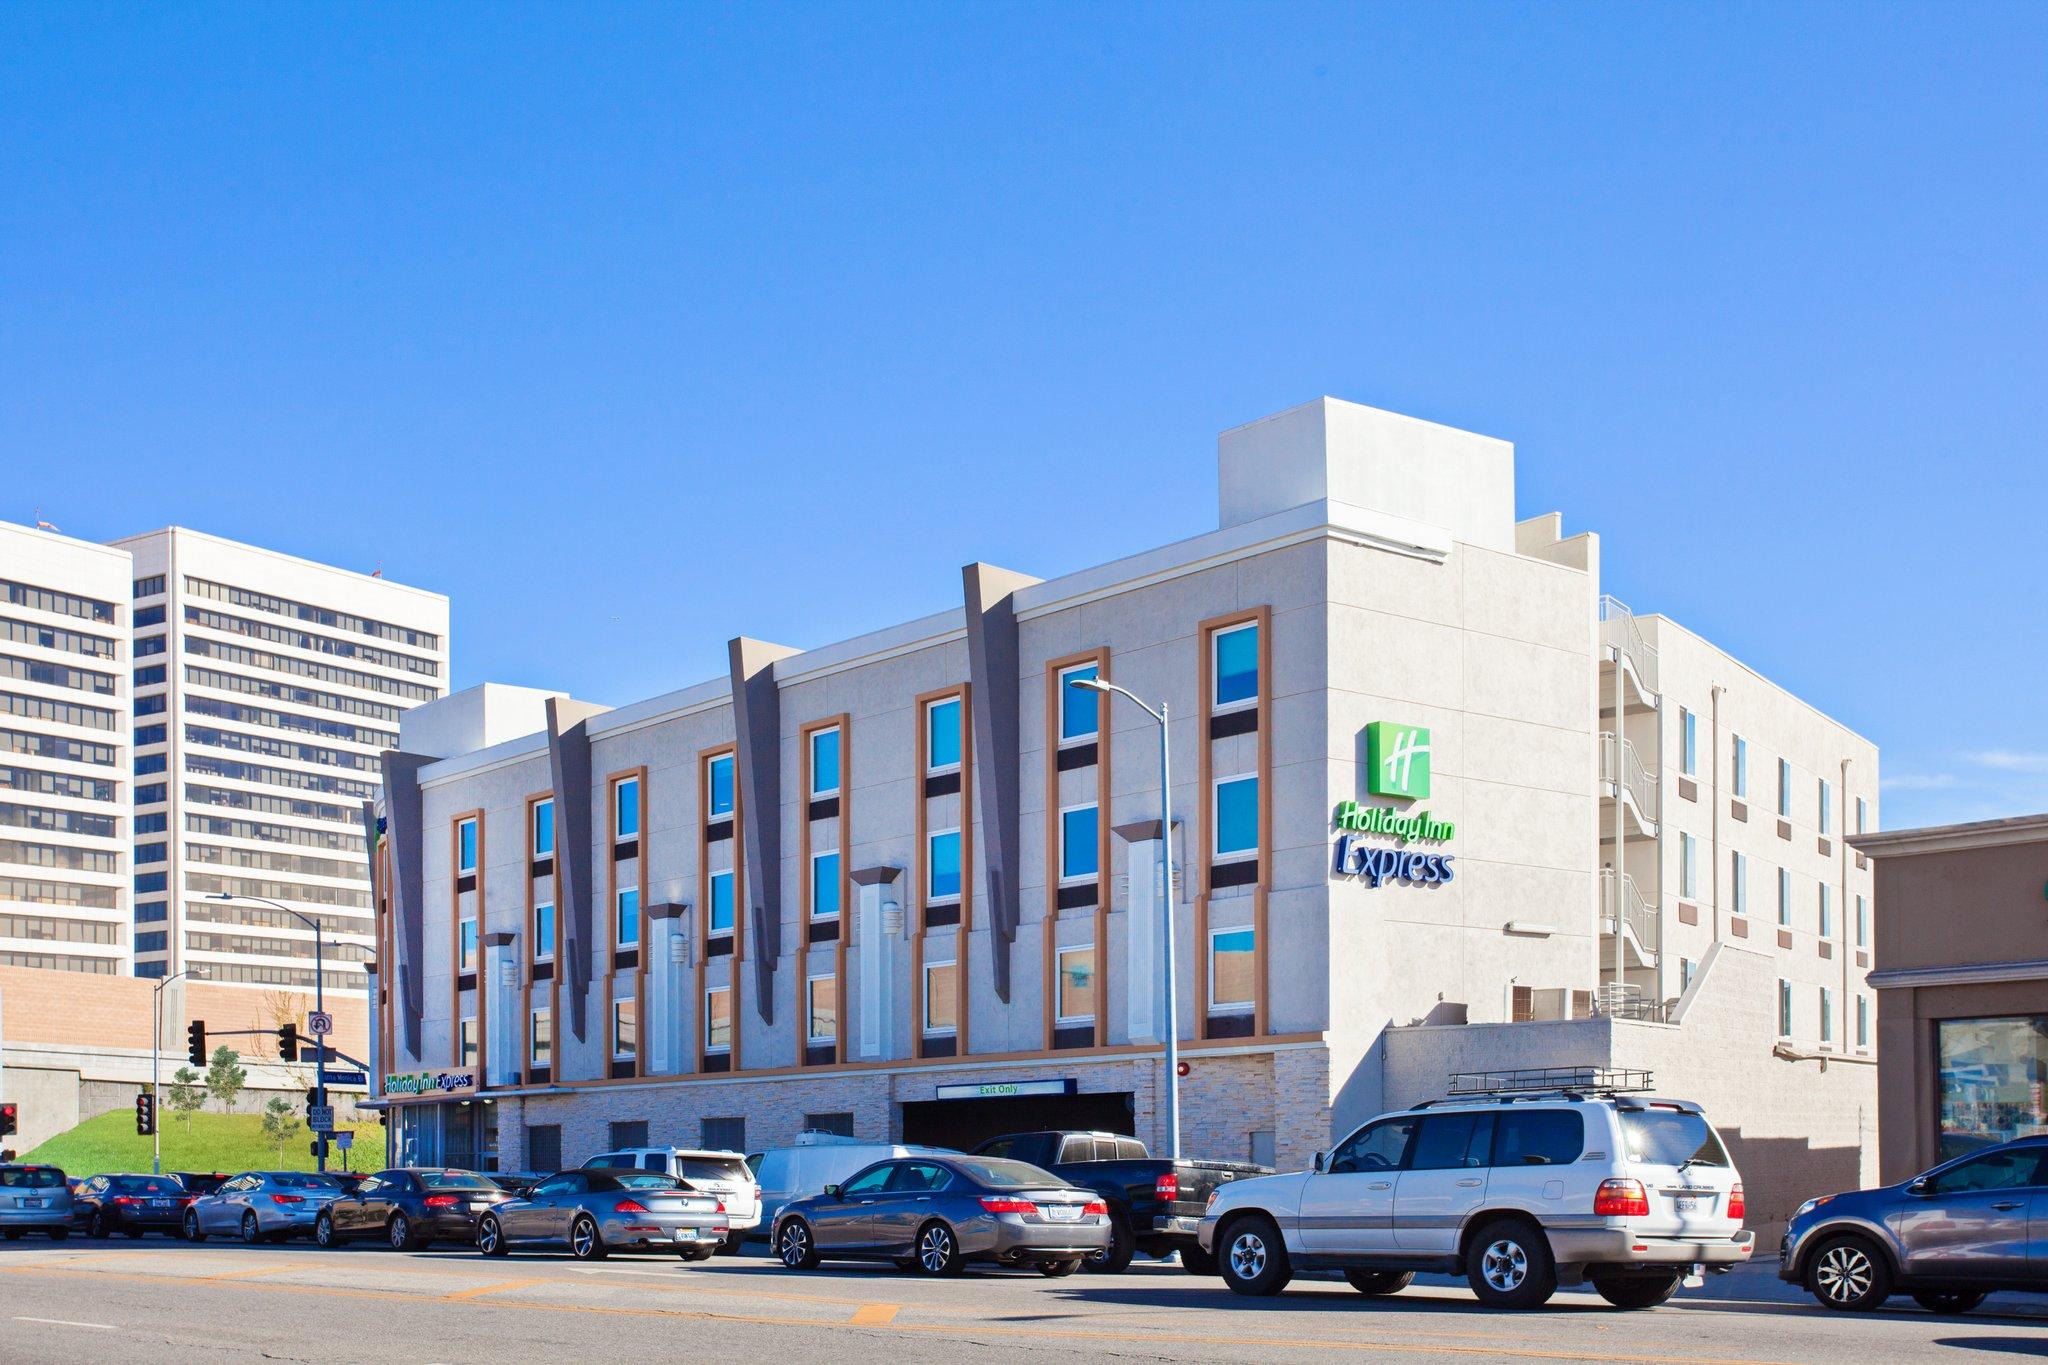 Holiday Inn Express - West LA in Los Angeles, CA